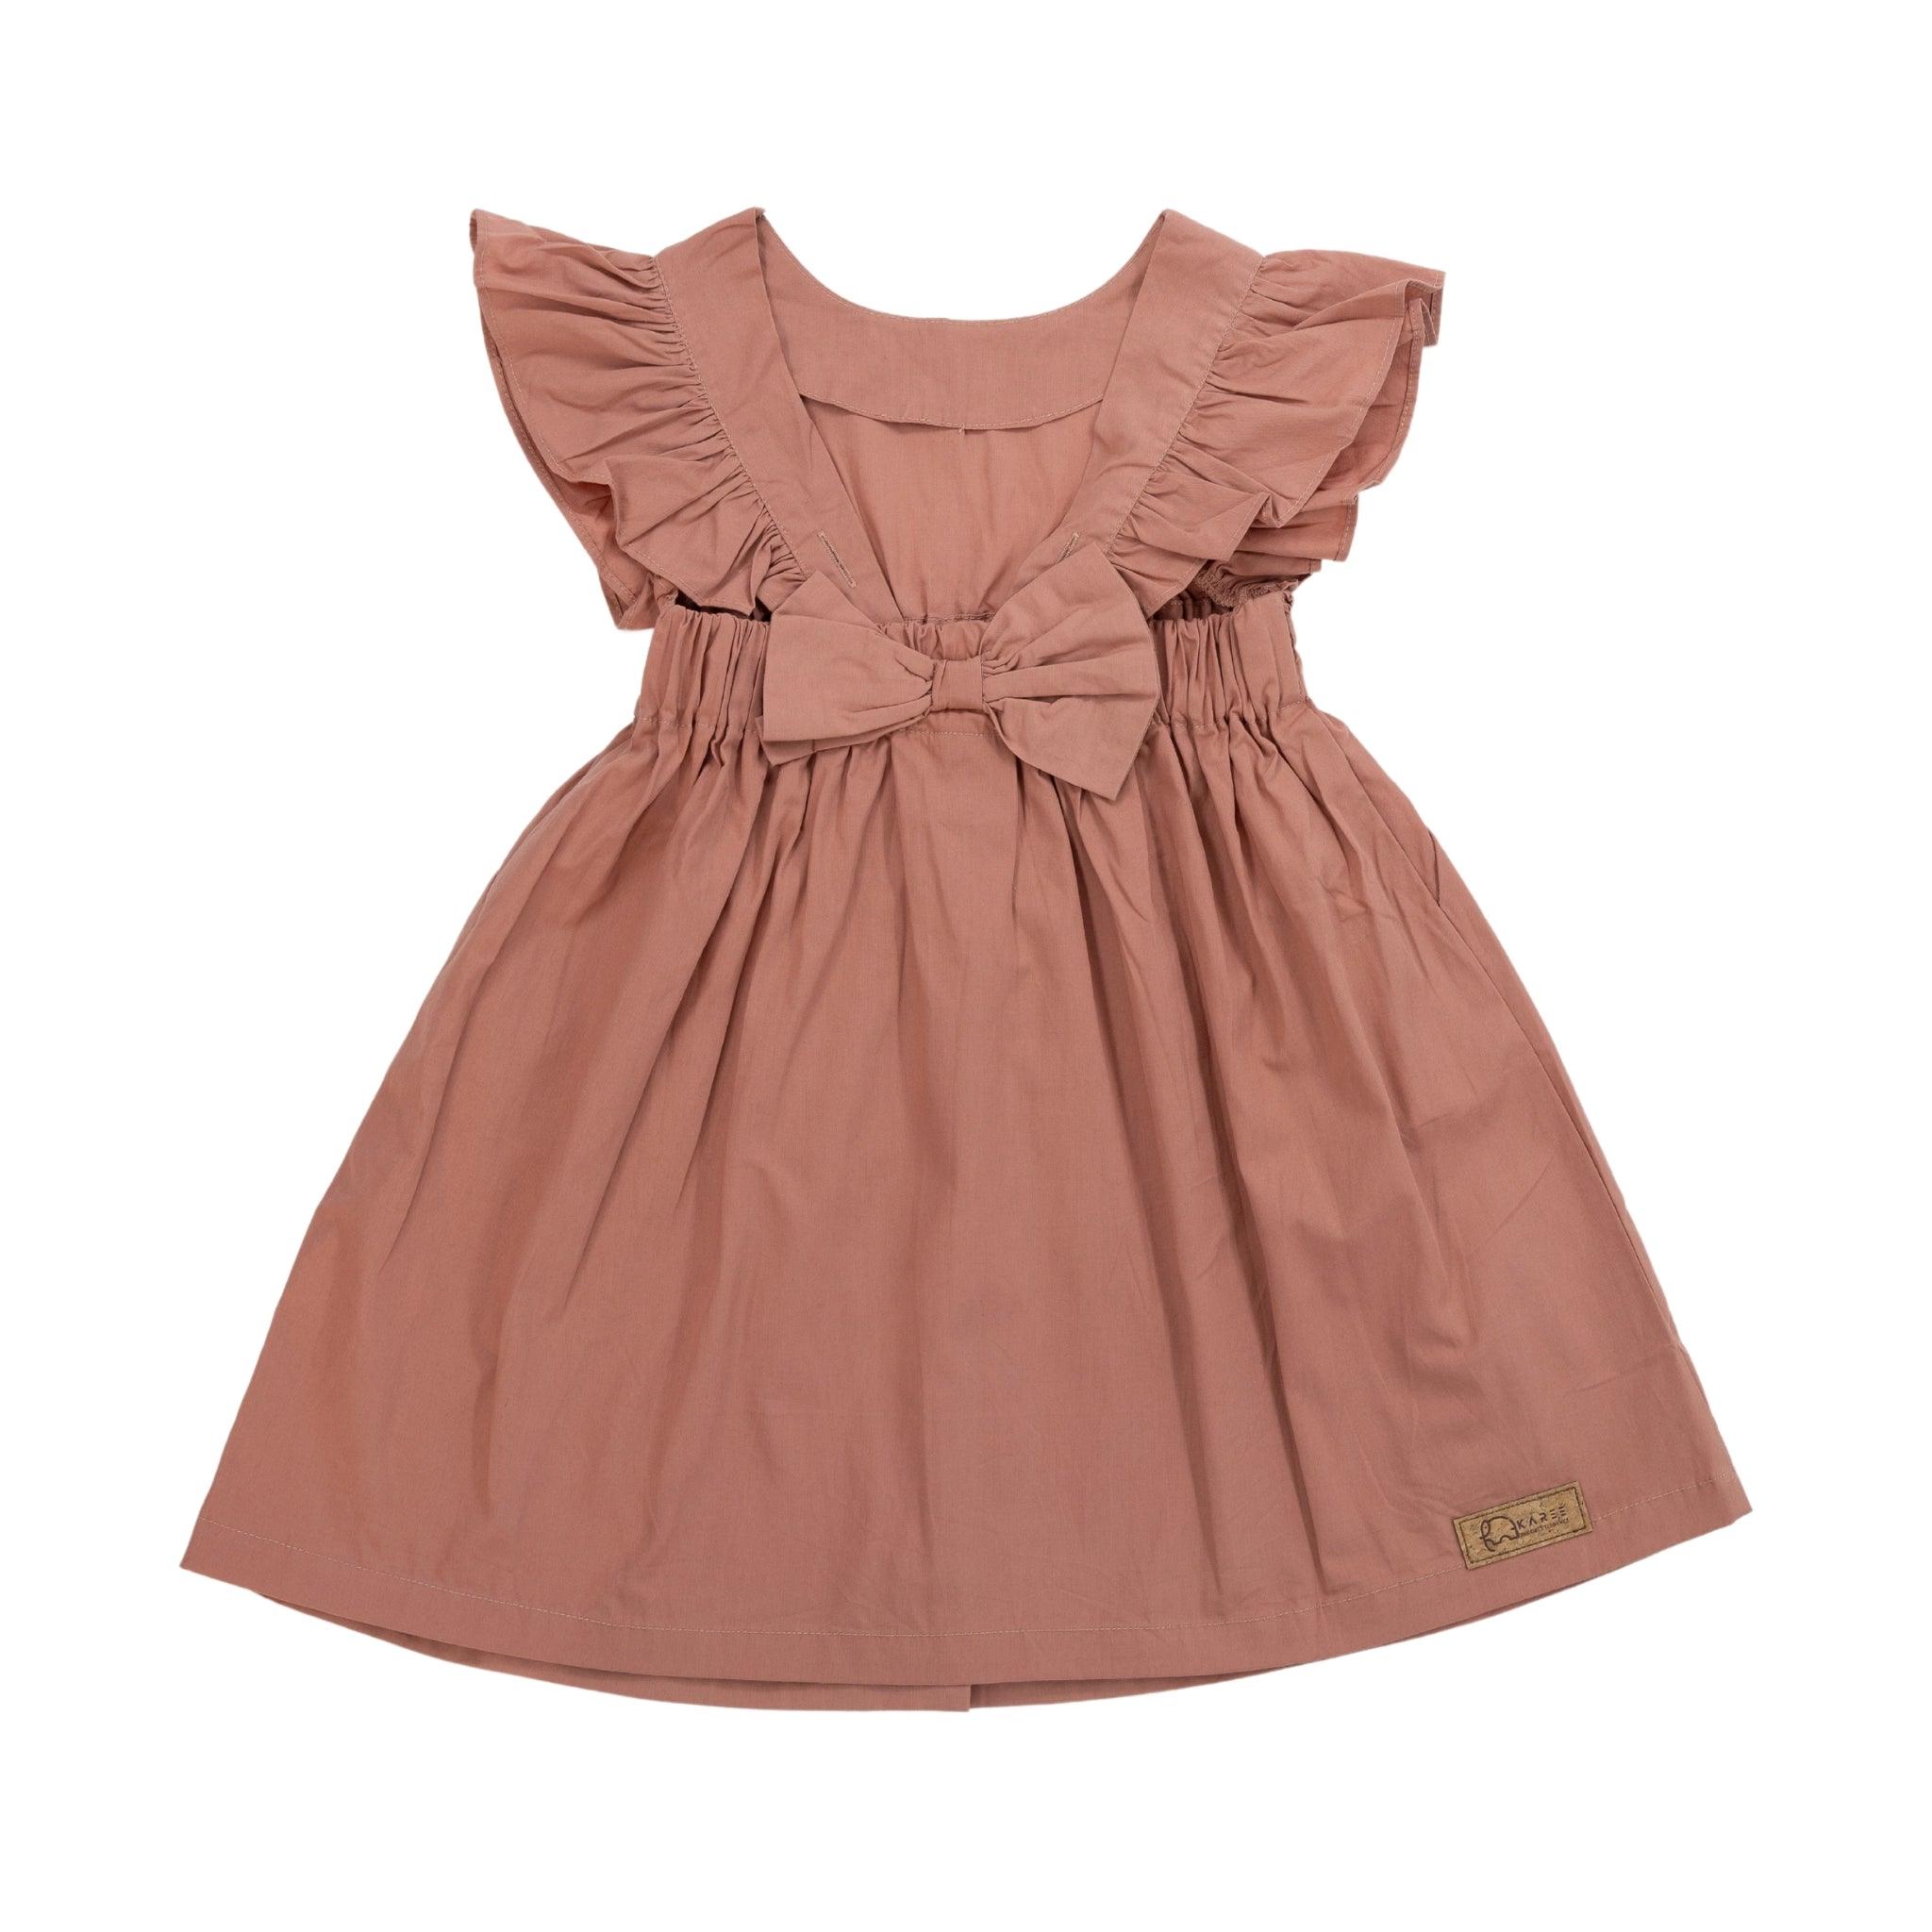 A Brick Dust Cotton Floral Dress for Girls by Karee, made of cotton fabric, with ruffled sleeves and a bow on the chest, displayed against a white background.